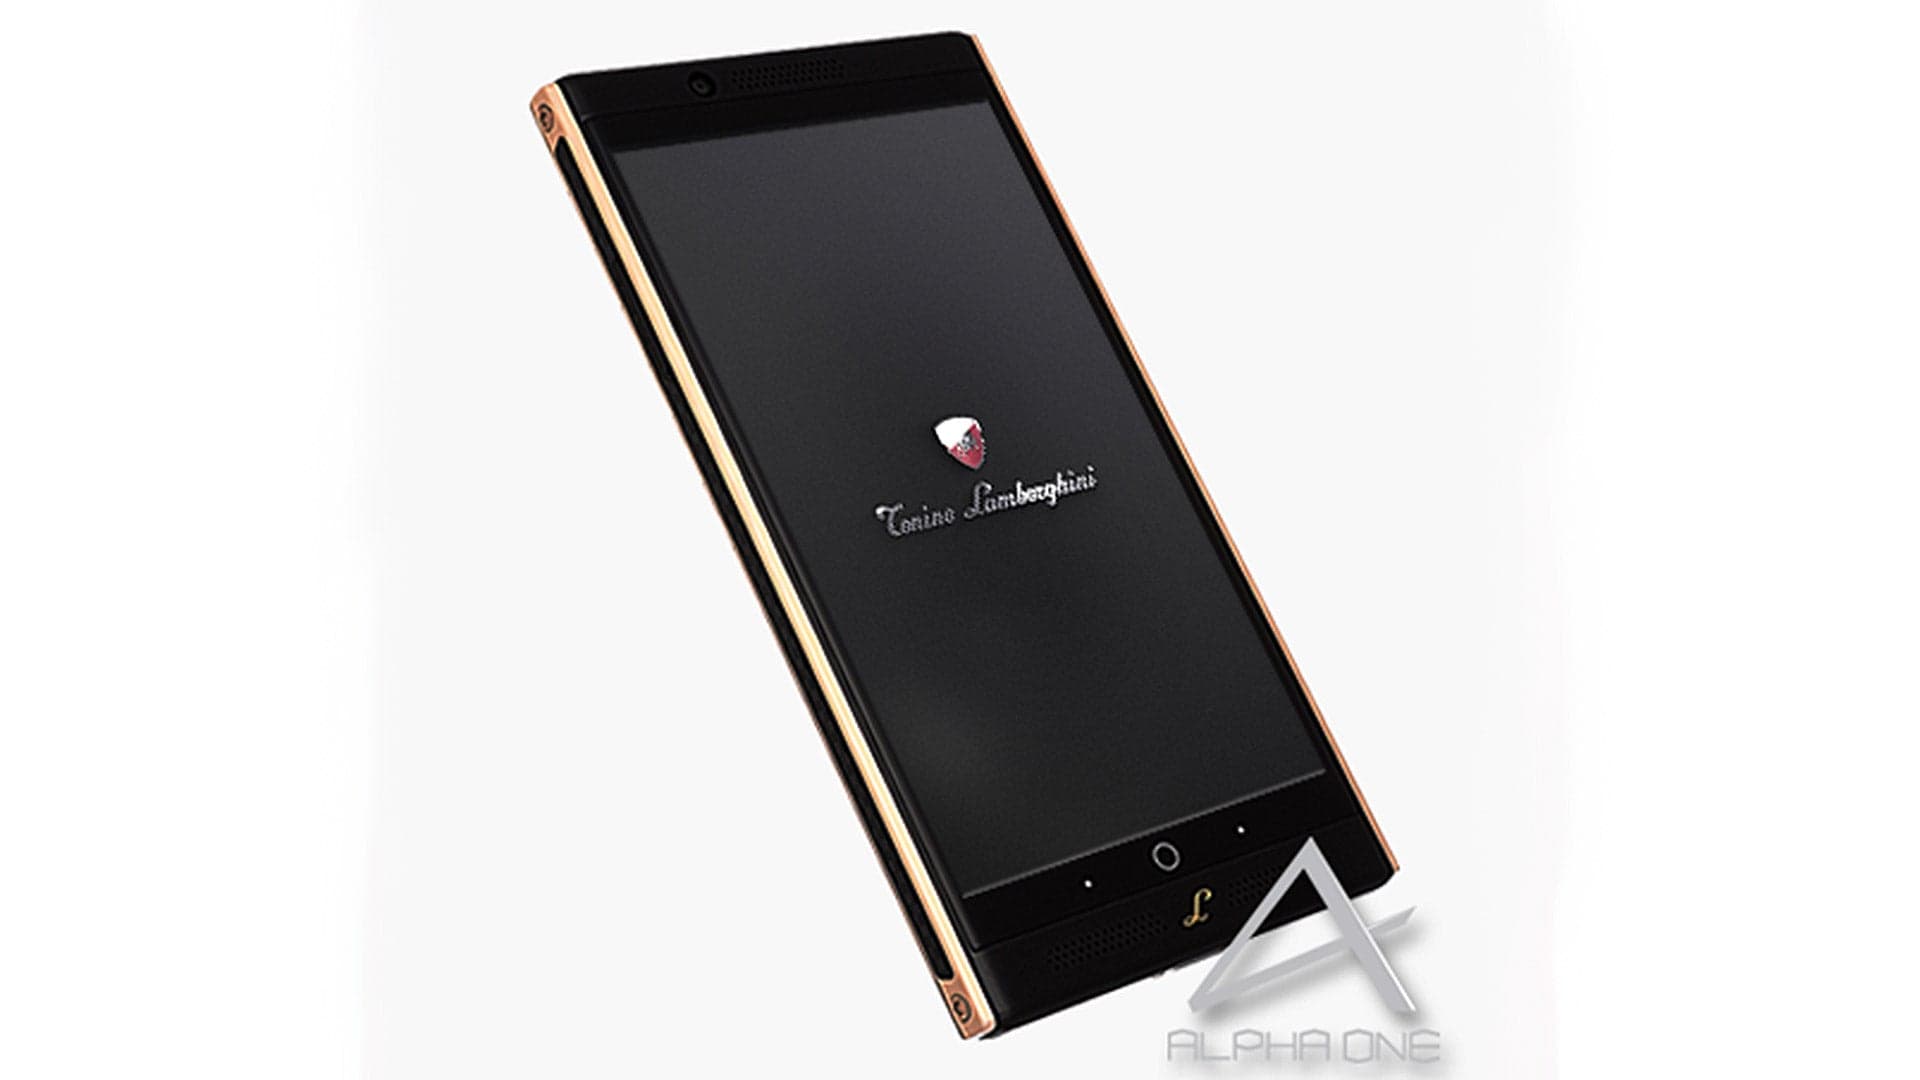 Lamborghini Releases $2,450 Leather-Covered Android Smartphone, for Some Reason